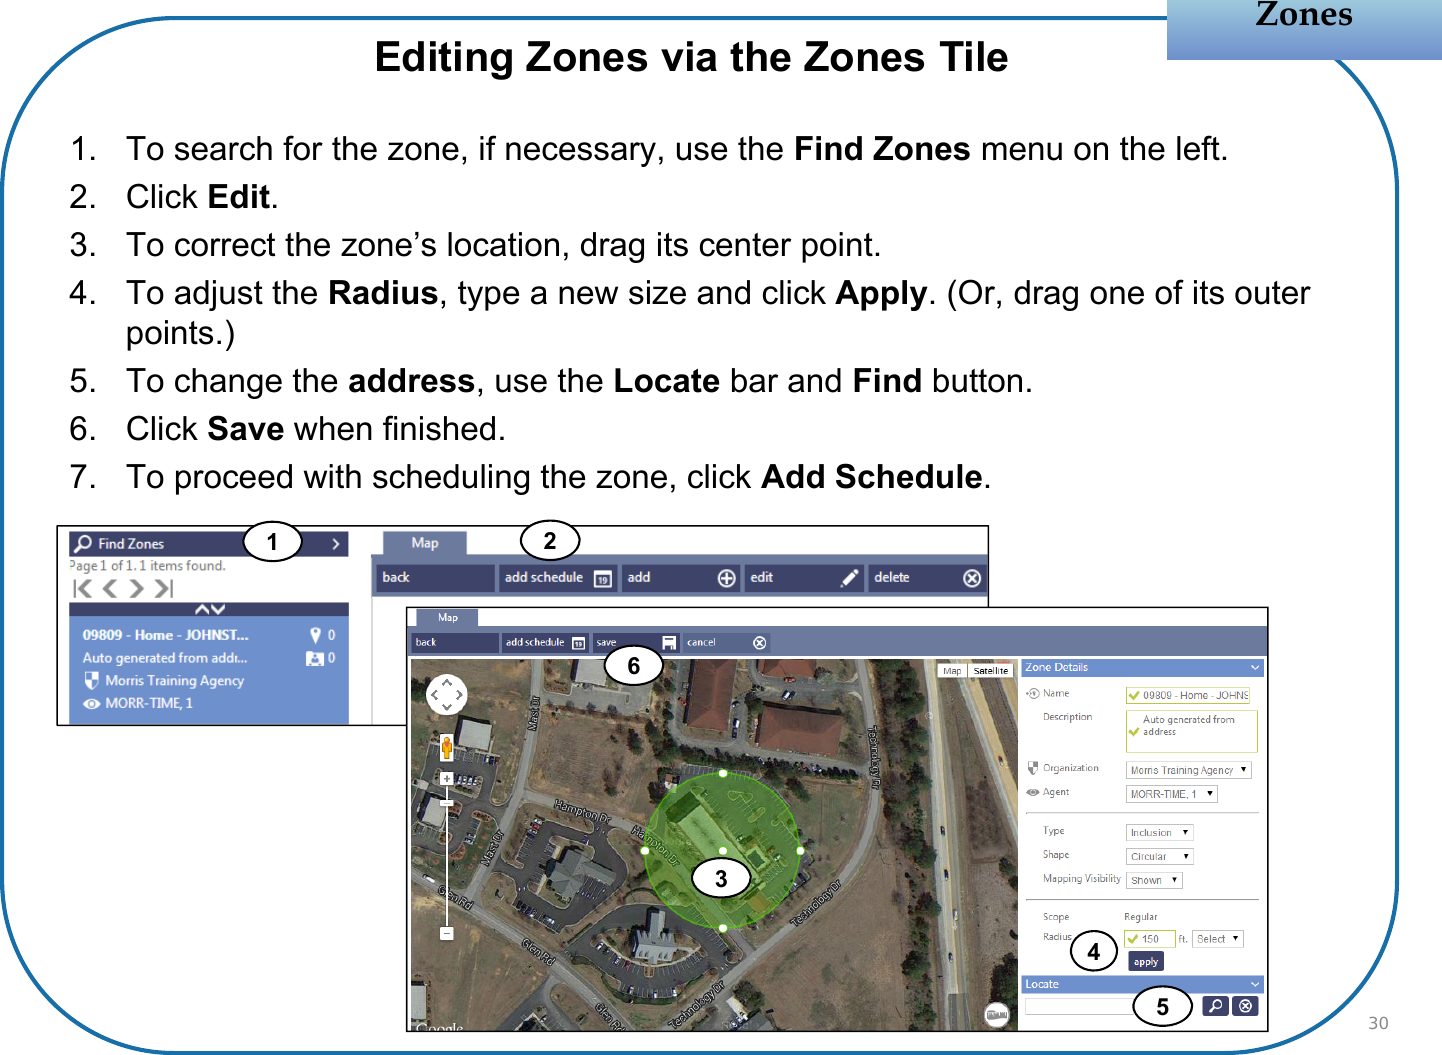 1. To search for the zone, if necessary, use the Find Zones menu on the left.2. Click Edit.3. To correct the zone’s location, drag its center point.4. To adjust the Radius, type a new size and click Apply. (Or, drag one of its outer points.)5. To change the address, use the Locate bar and Find button.6. Click Save when finished.7. To proceed with scheduling the zone, click Add Schedule.12ZonesZonesEditing Zones via the Zones Tile304356